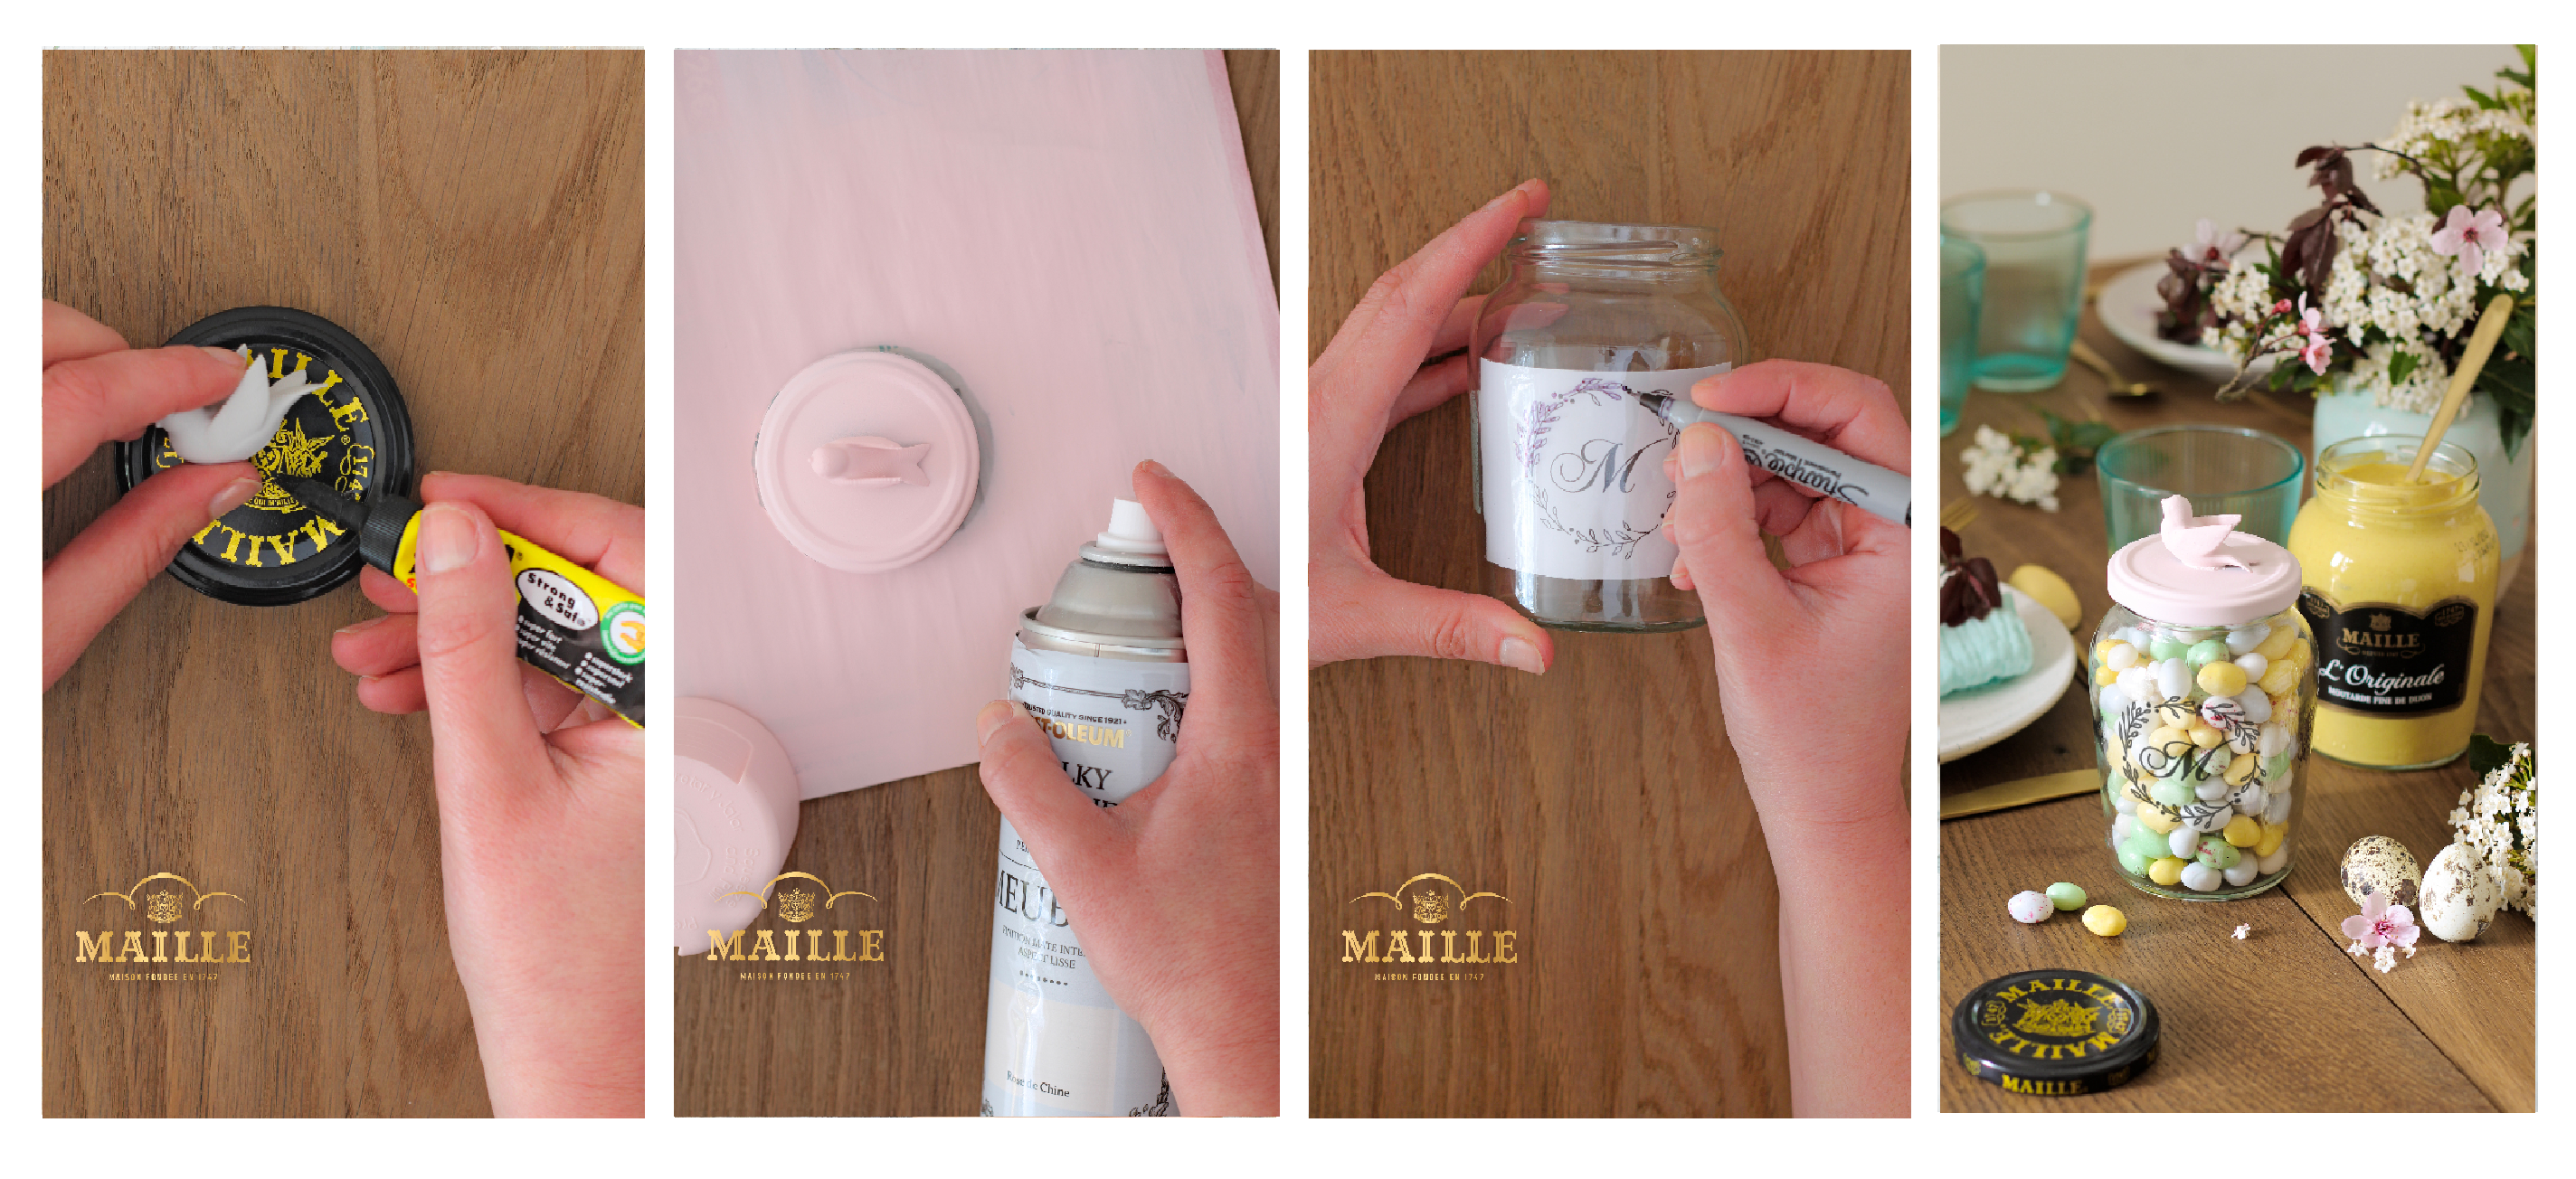 MAILLE Texte DIY Avril 1